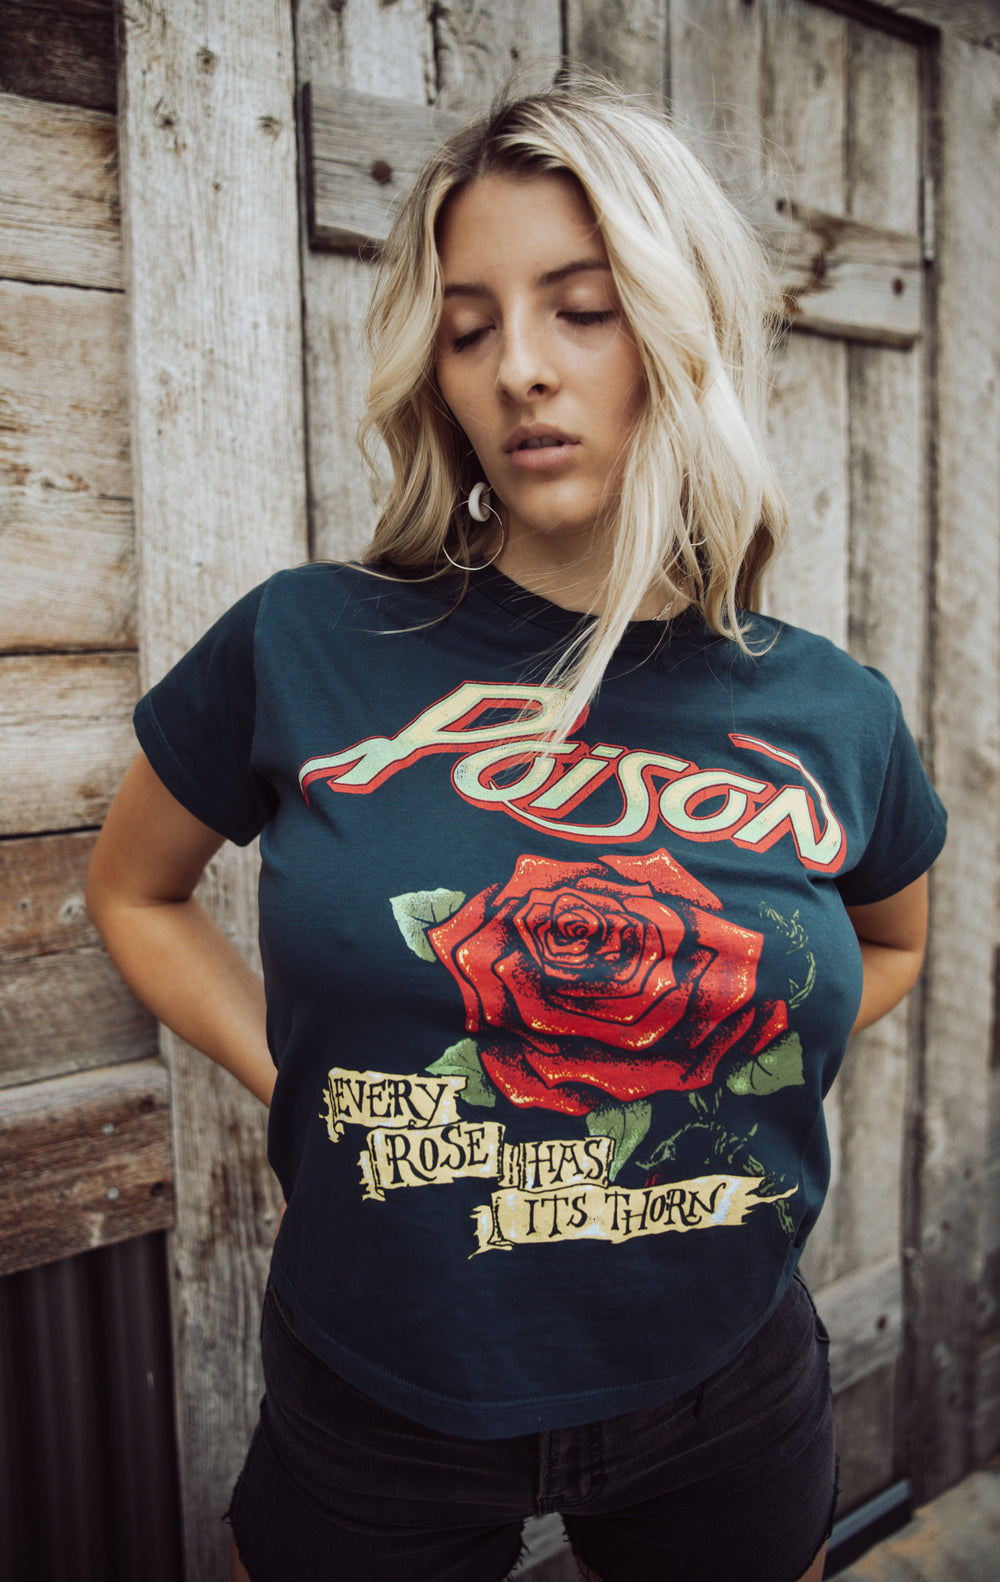 DAYDREAMER POISON EVERY ROSE HAS ITS THORN SOLO TEE